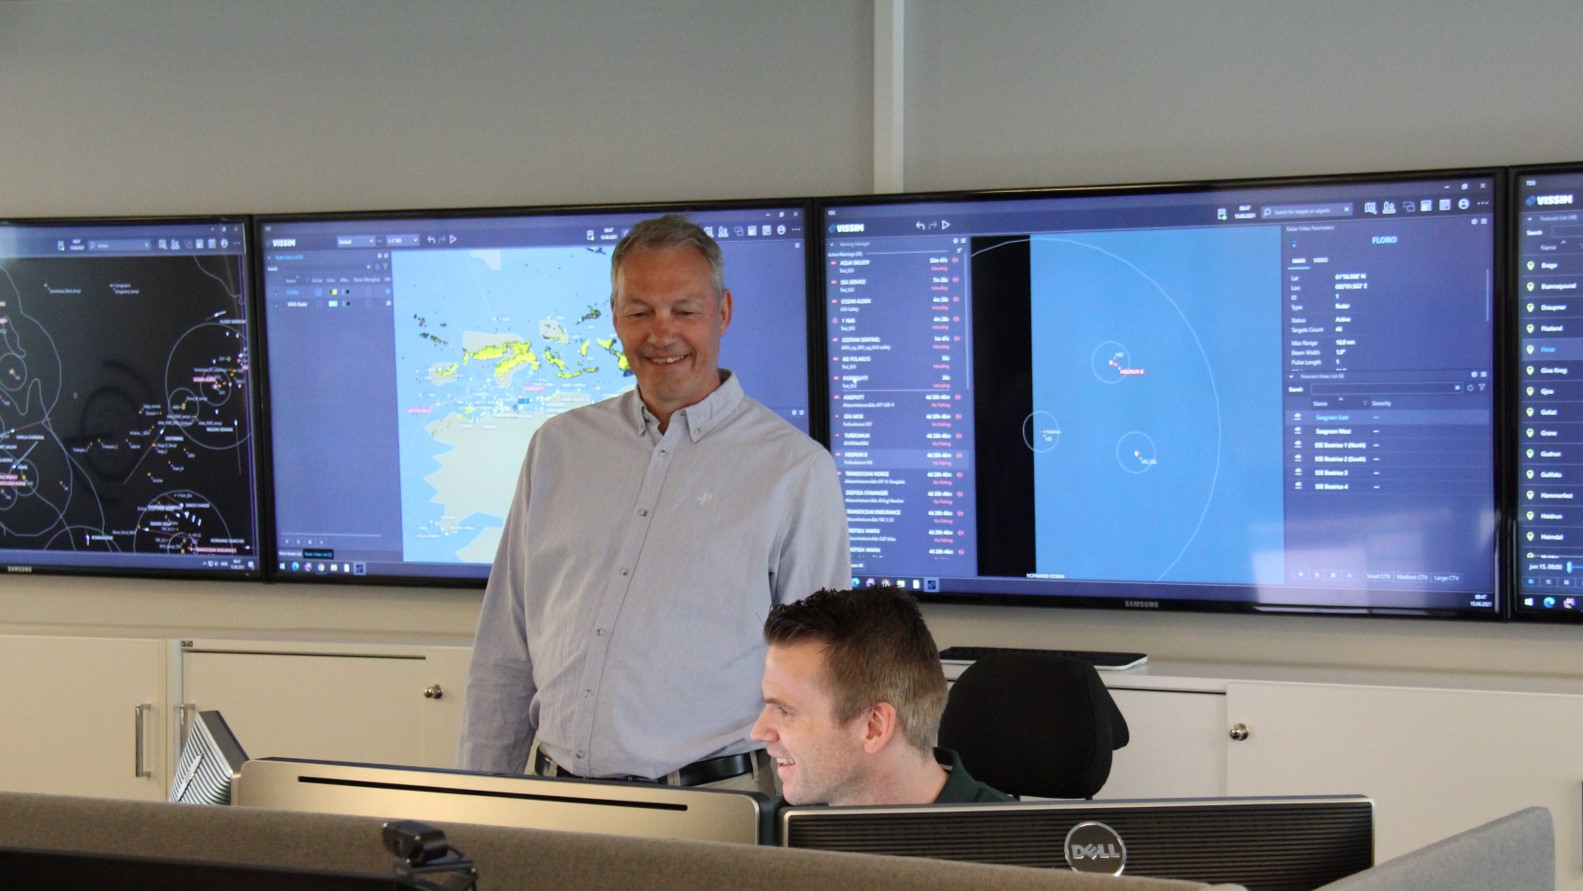 A photo from Vissim control room in Horten